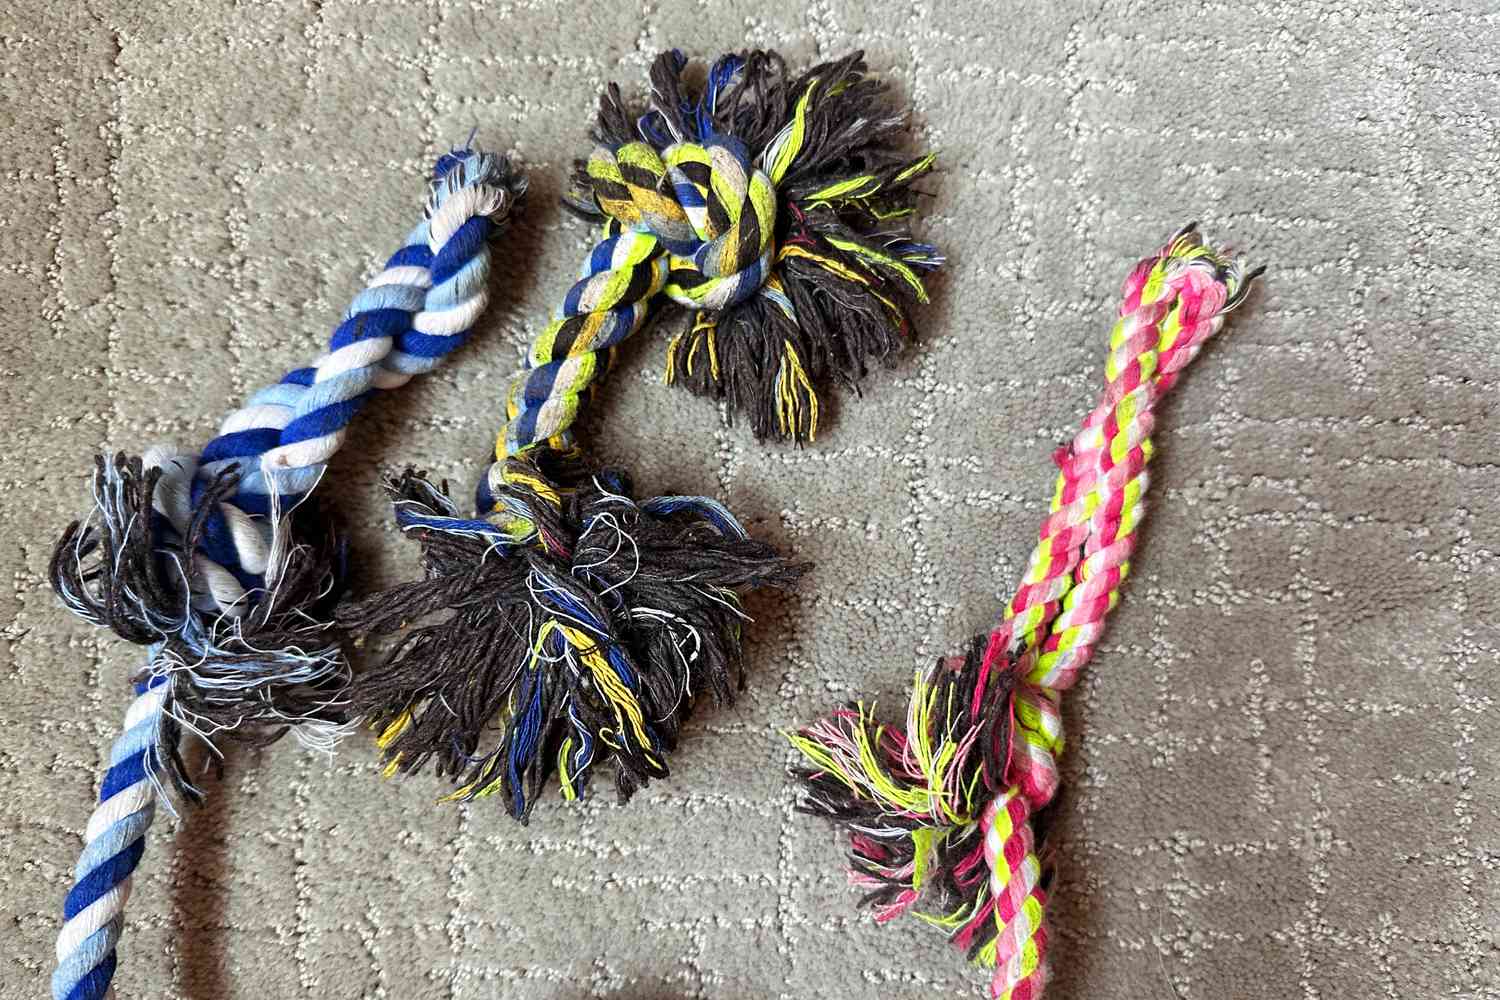 various Otterly Pets Puppy Dog Pet Rope Toys on carpeted floor